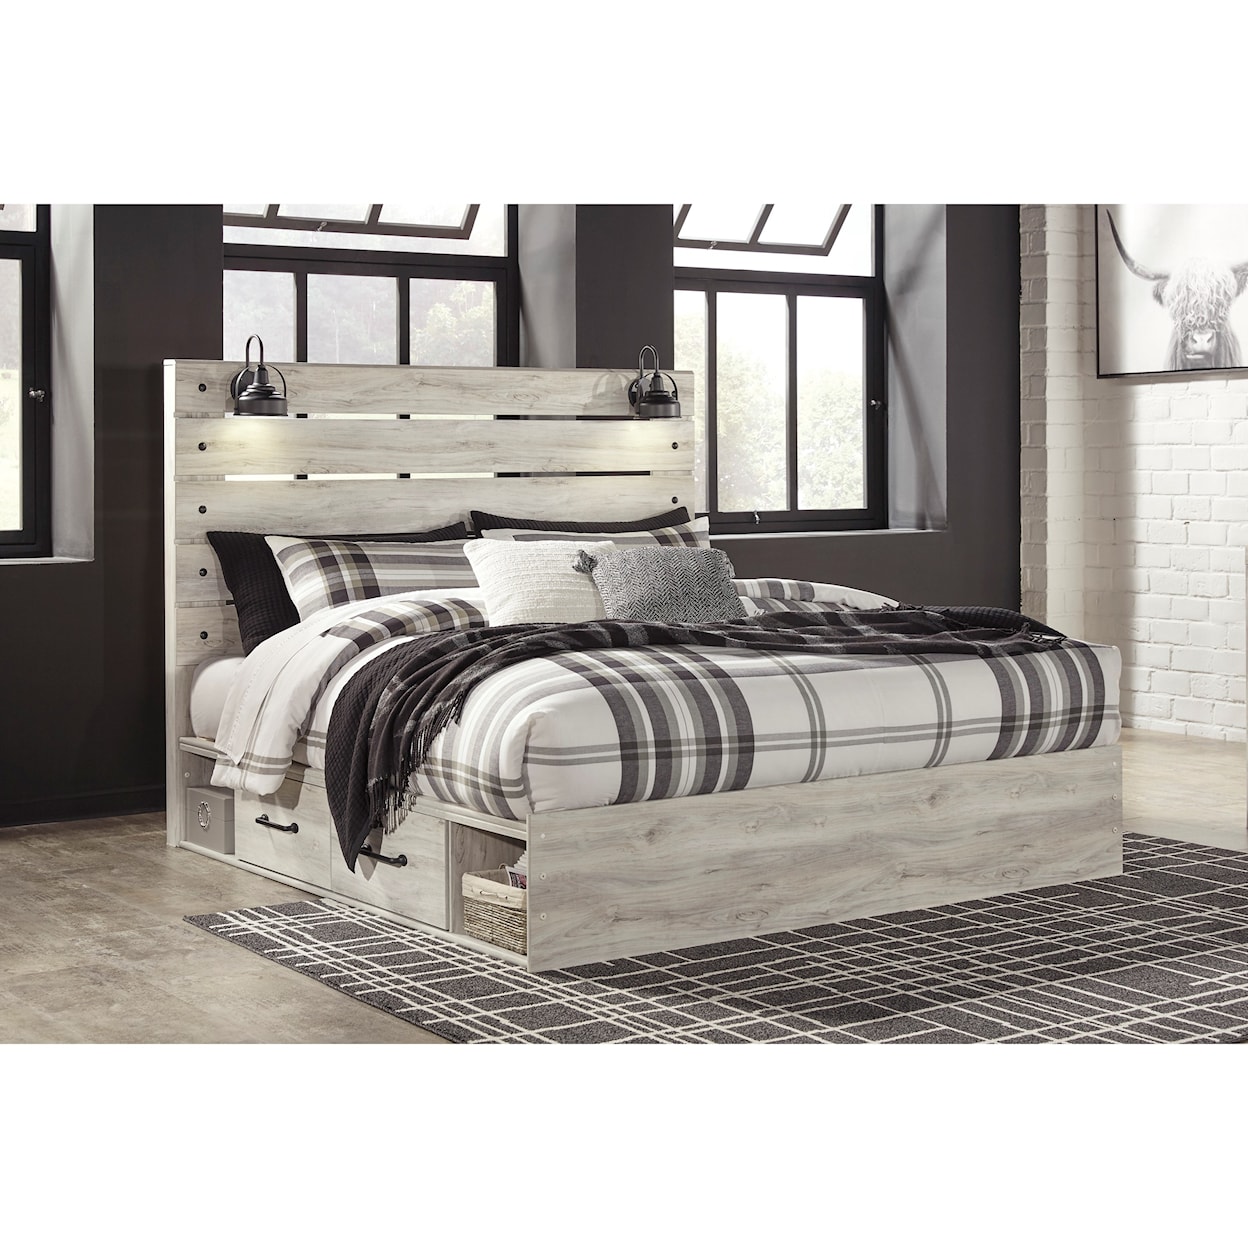 Ashley Furniture Signature Design Cambeck King Storage Bed with 4 Drawers